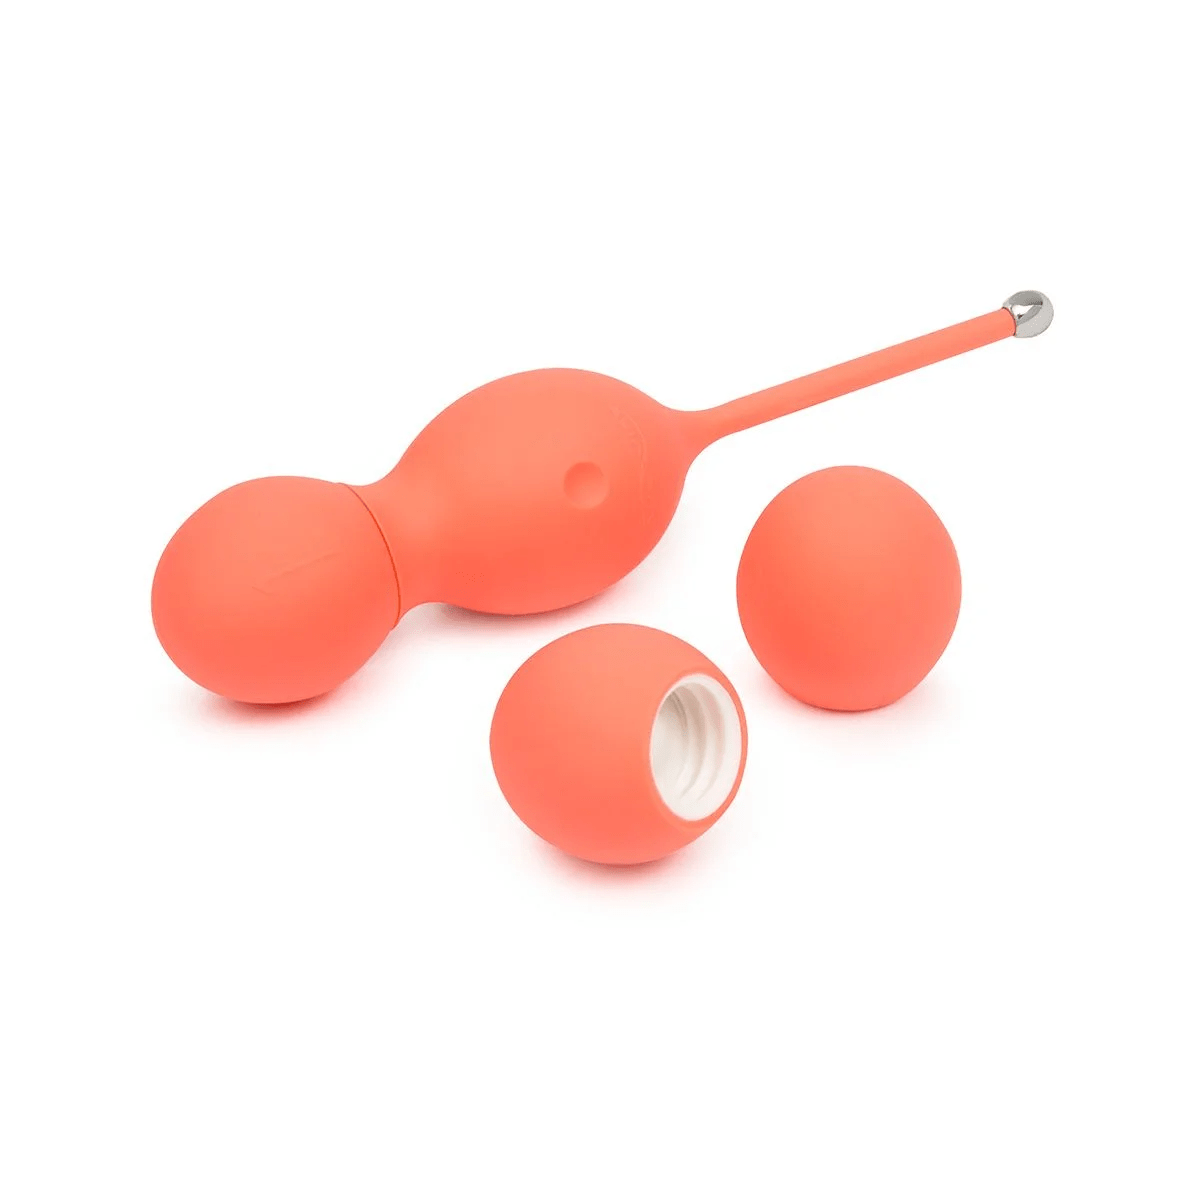 WE-VIBE BLOOM - APP CONTROLLED VIBRATING KEGEL BALLS Accessories / Miscellaneous We-Vibe   